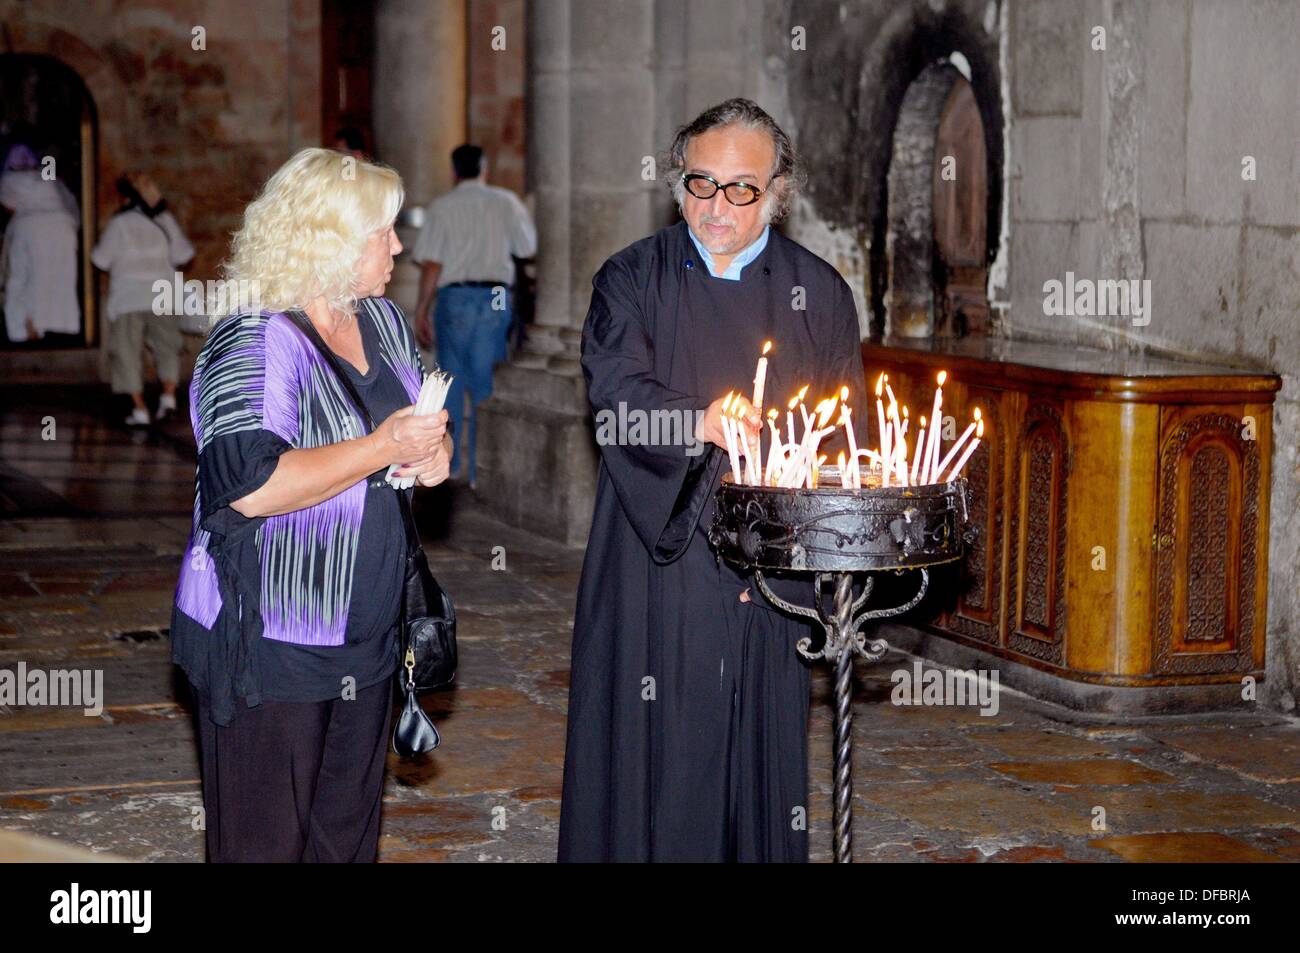 A believer talks to a priest before visiting the most important site of the Church of the Holy Sepulchre, the Aedicule (Holy Grave, Grave Chapel), the supposed location of Jesus' grave and the 14th station of the Via Dolorosa, that is visited by thousands of pilgrims and tourists daily, in Jerusalem, Israel, 10 September 2013. The Via Dolorosa (Way of Suffering) is a street in the old town of Jerusalem named after the path Jesus of Nazareth walked to his crucification. Jesus carried the cross, on which he later died via that road from the Antonia Fortress, then seat of Pilate, to Golgotha, the Stock Photo